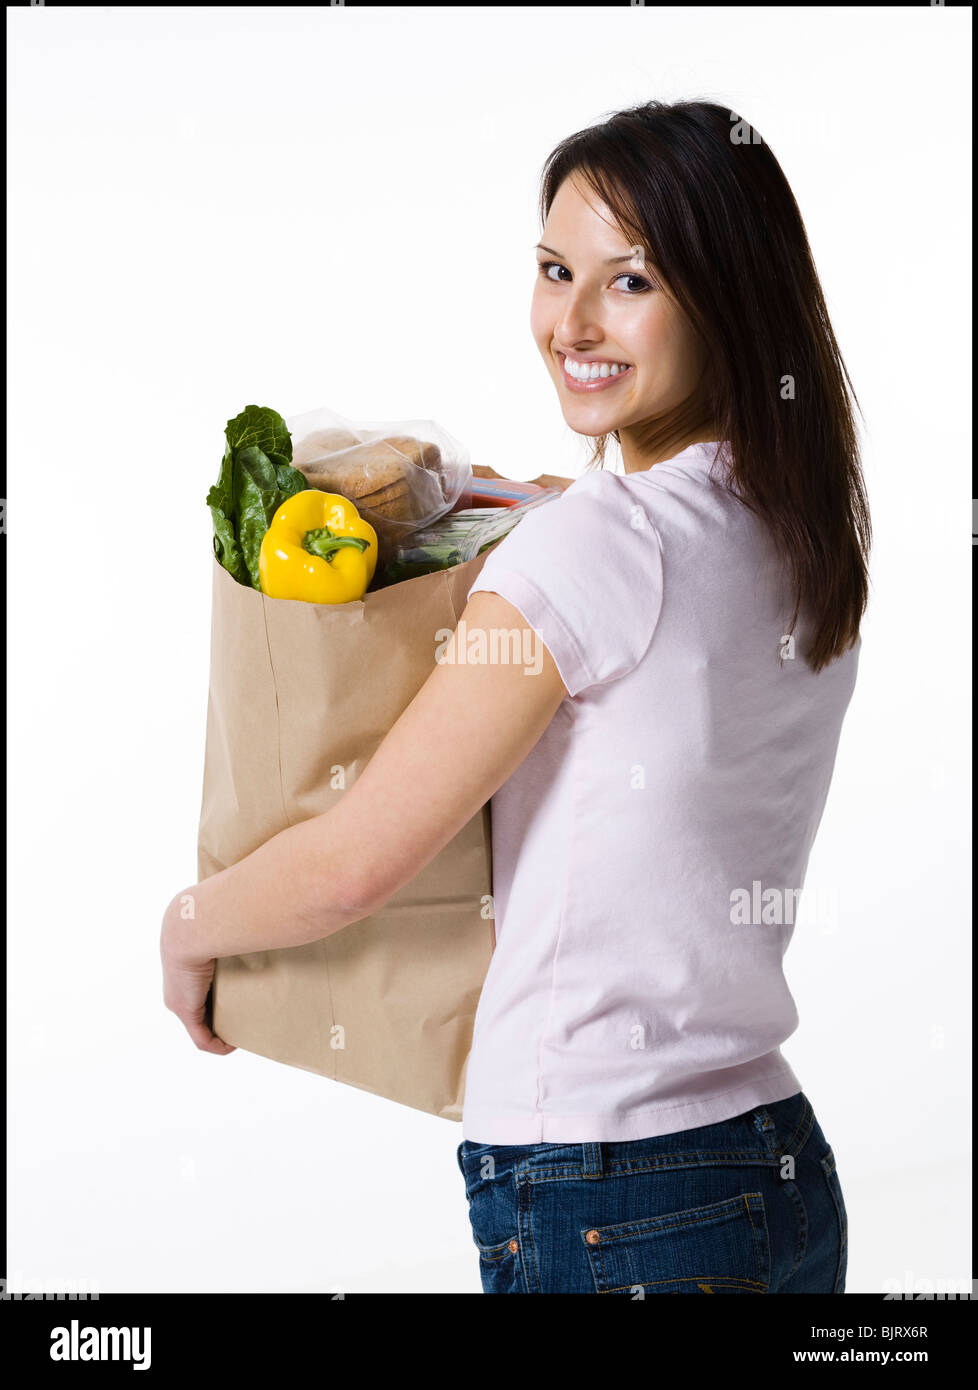 Woman holding a bag of groceries Stock Photo